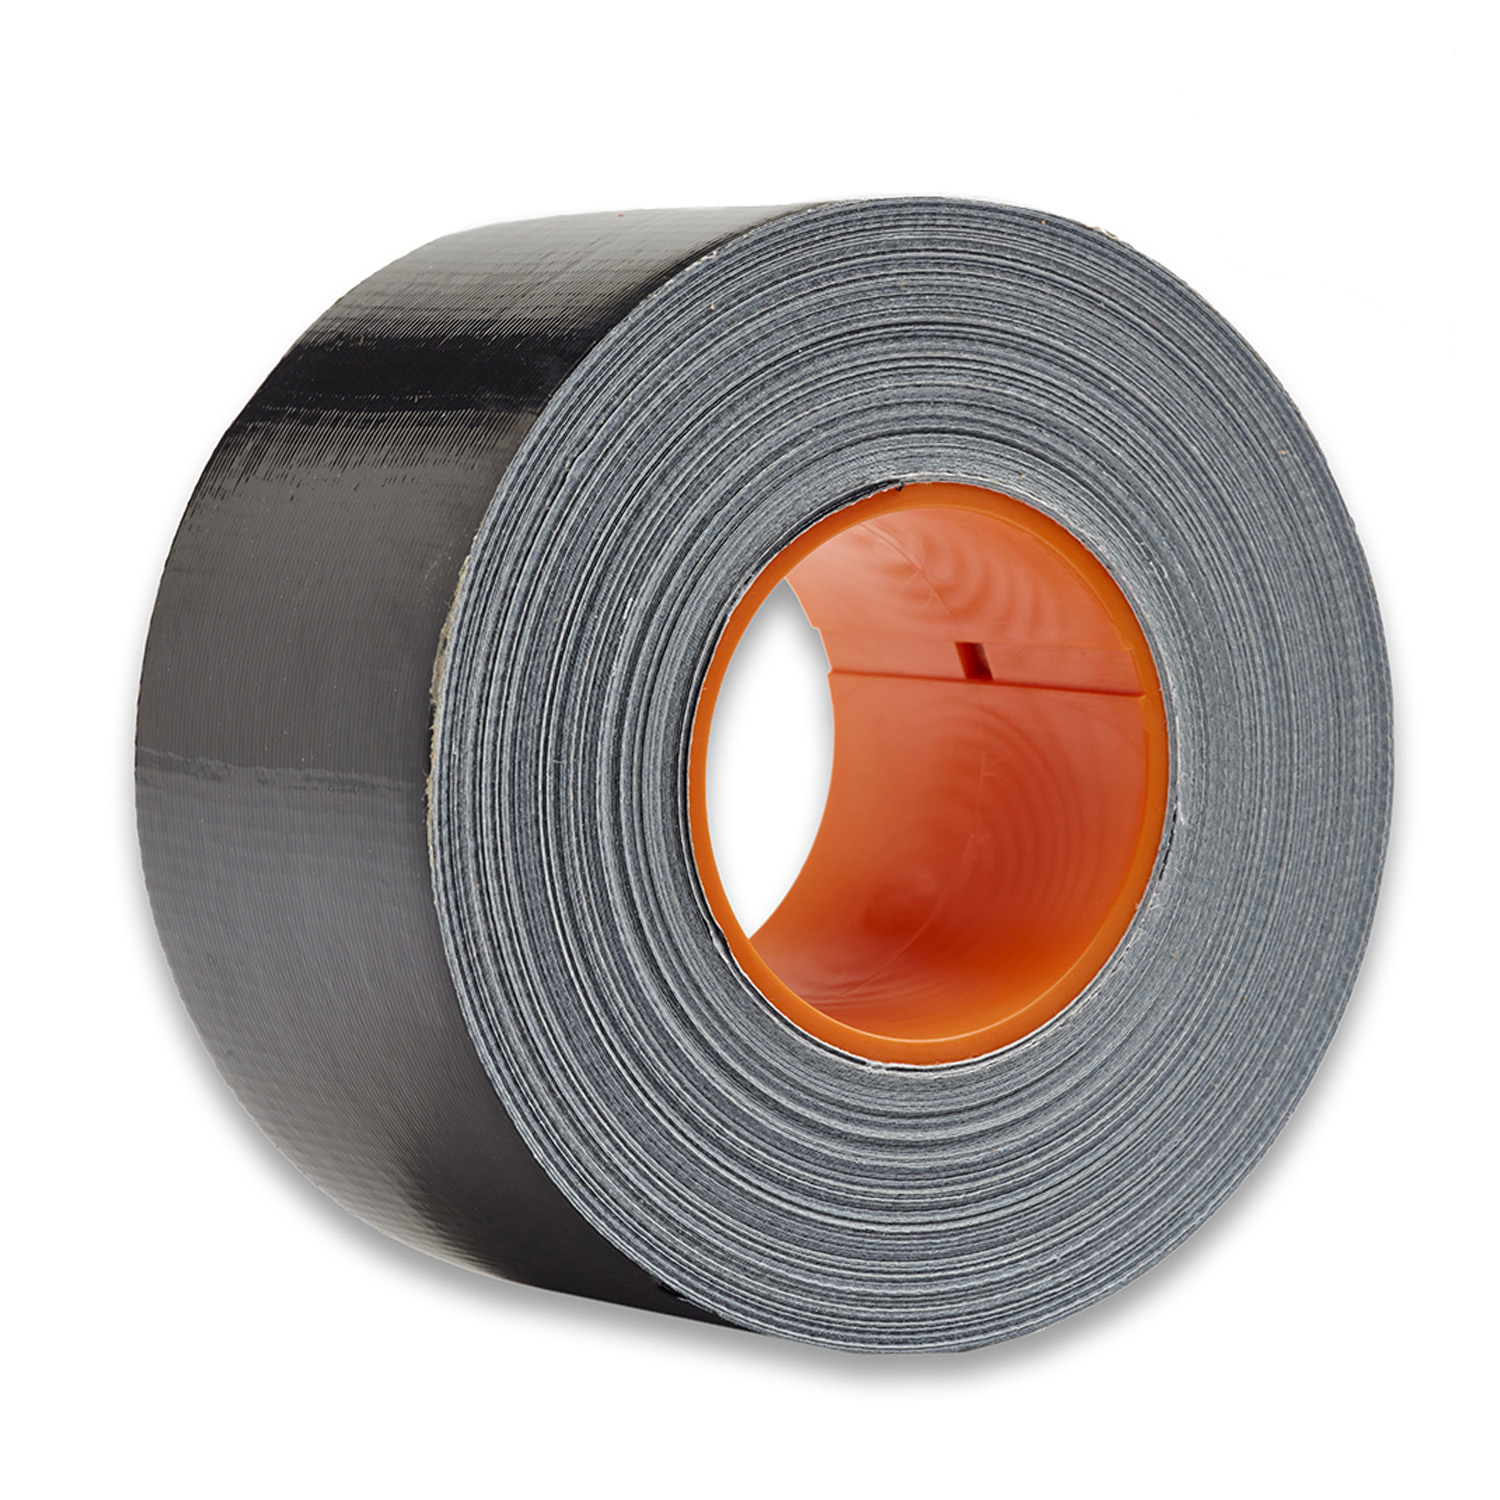 DUCT Tape 48 mm x 50 m, black ( incl. CoreLok for best laying results ), Packing 24 pcs